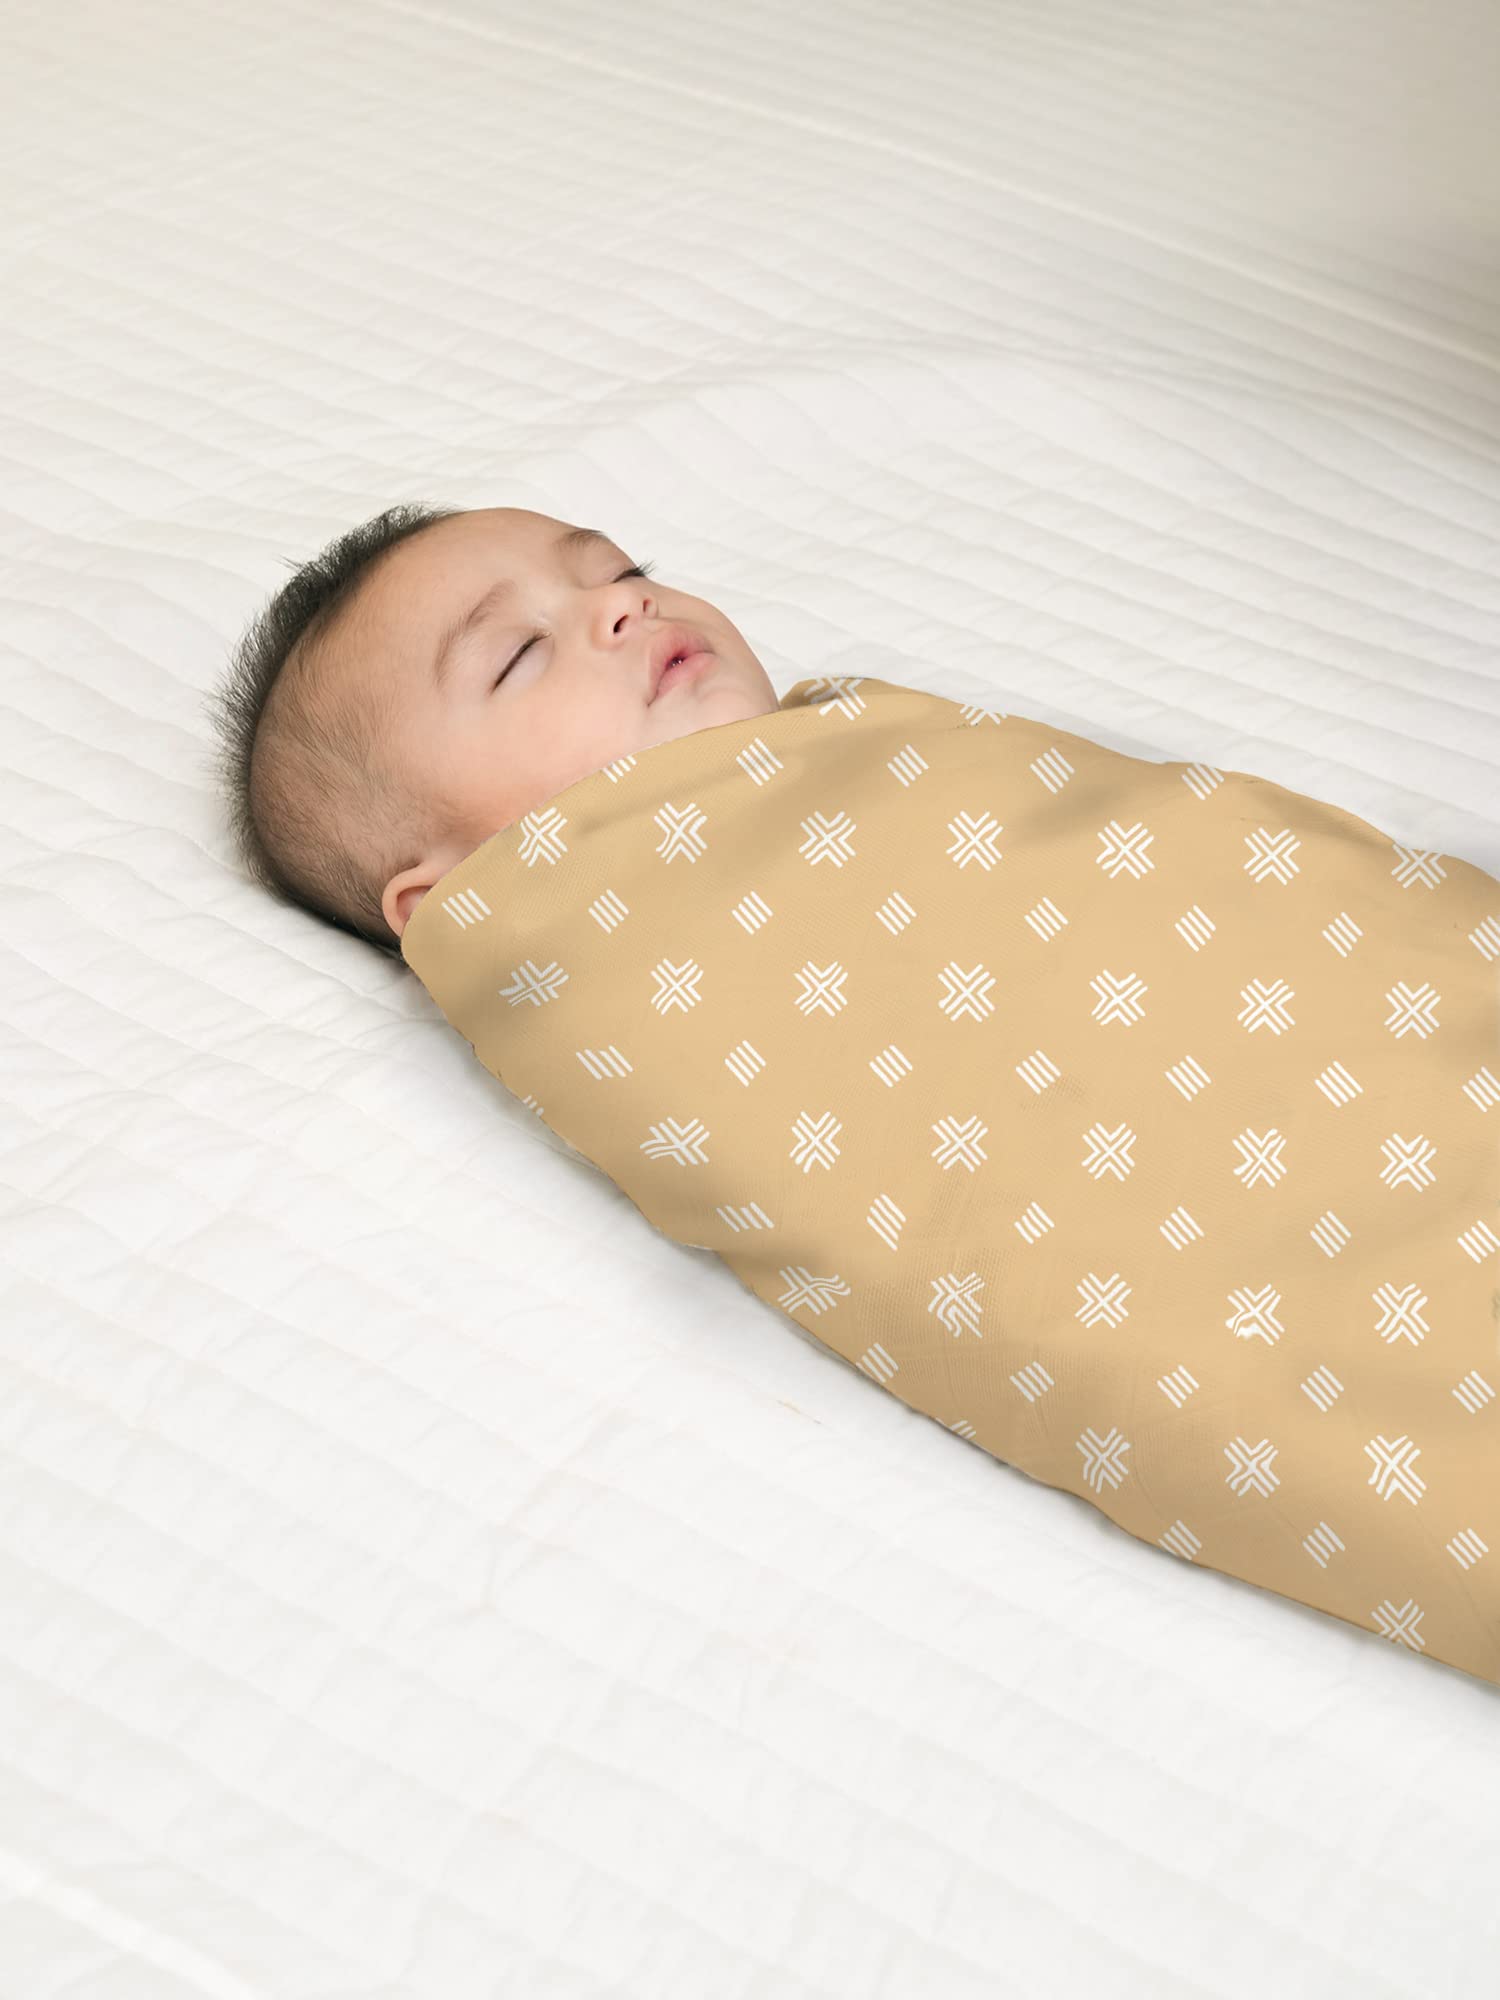 Mush 100% Bamboo Swaddle : Ultra Soft, Breathable, Thermoregulating, Absorbent, Light Weight and Multipurpose Bamboo Wrapper / Baby Bath Towel / Blanket (1, Geo Mustard)